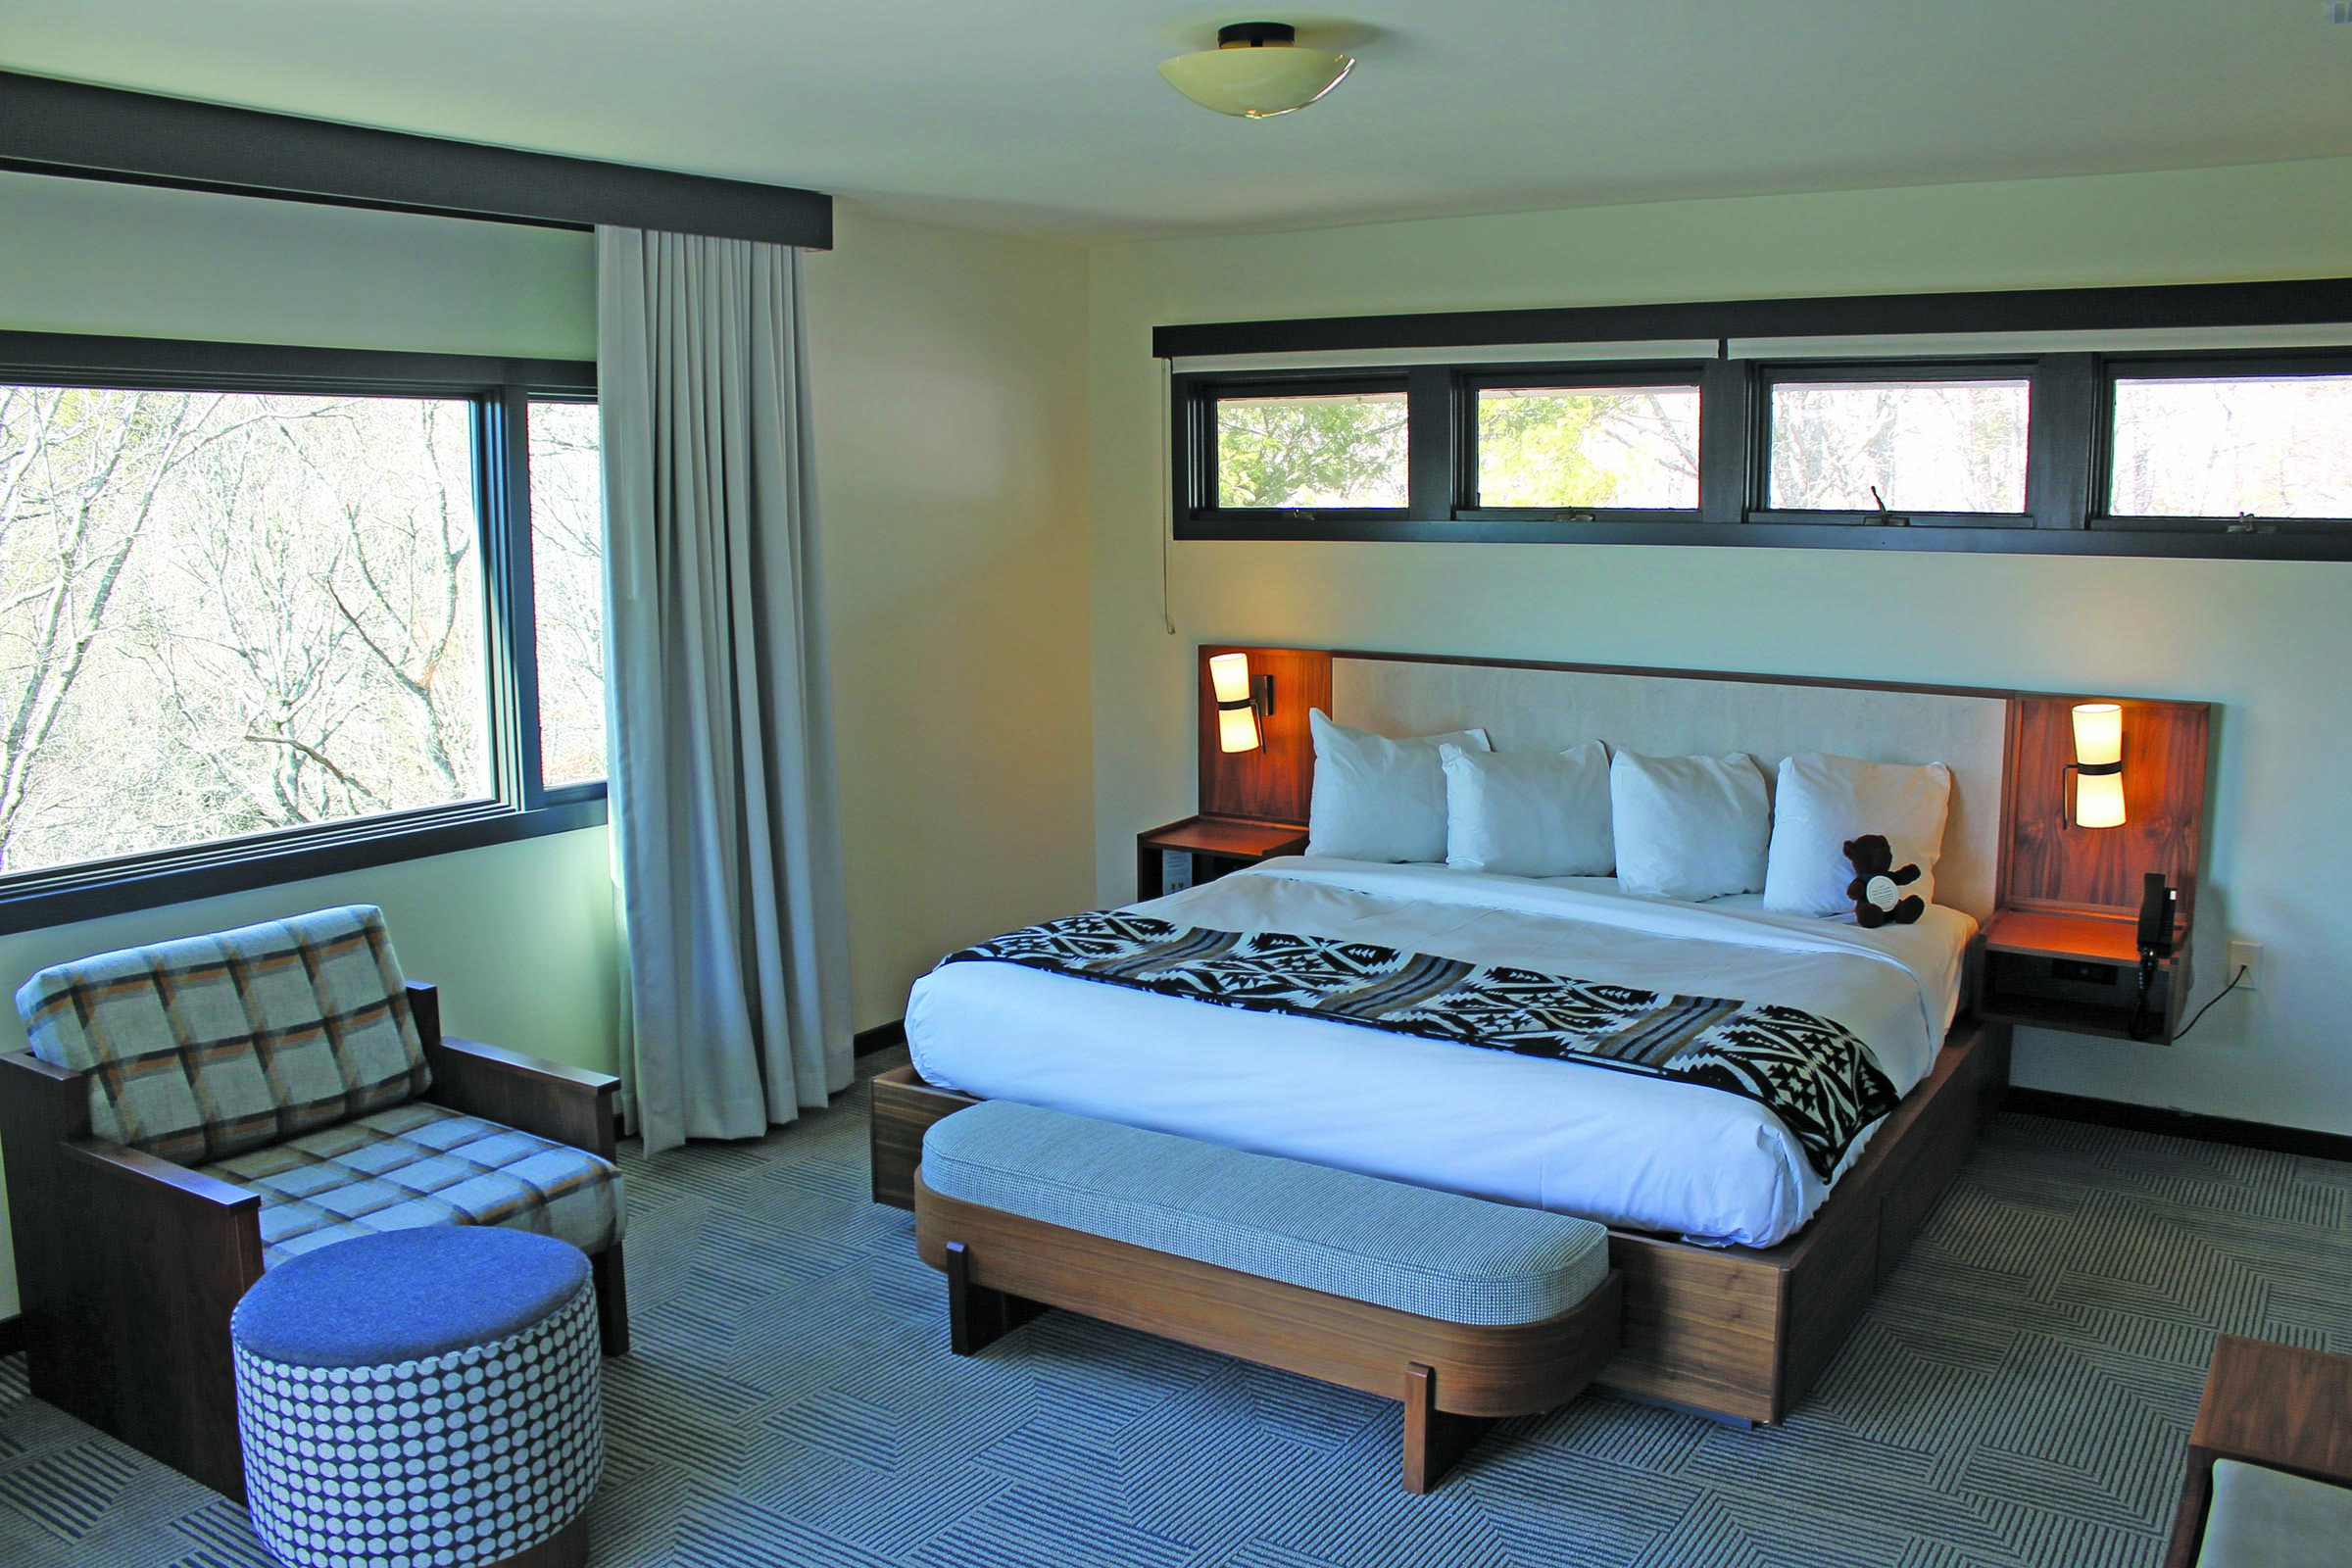 The "Honeymoon Suite" at Skyline Lodge Photo by Christopher Lugo/Staff